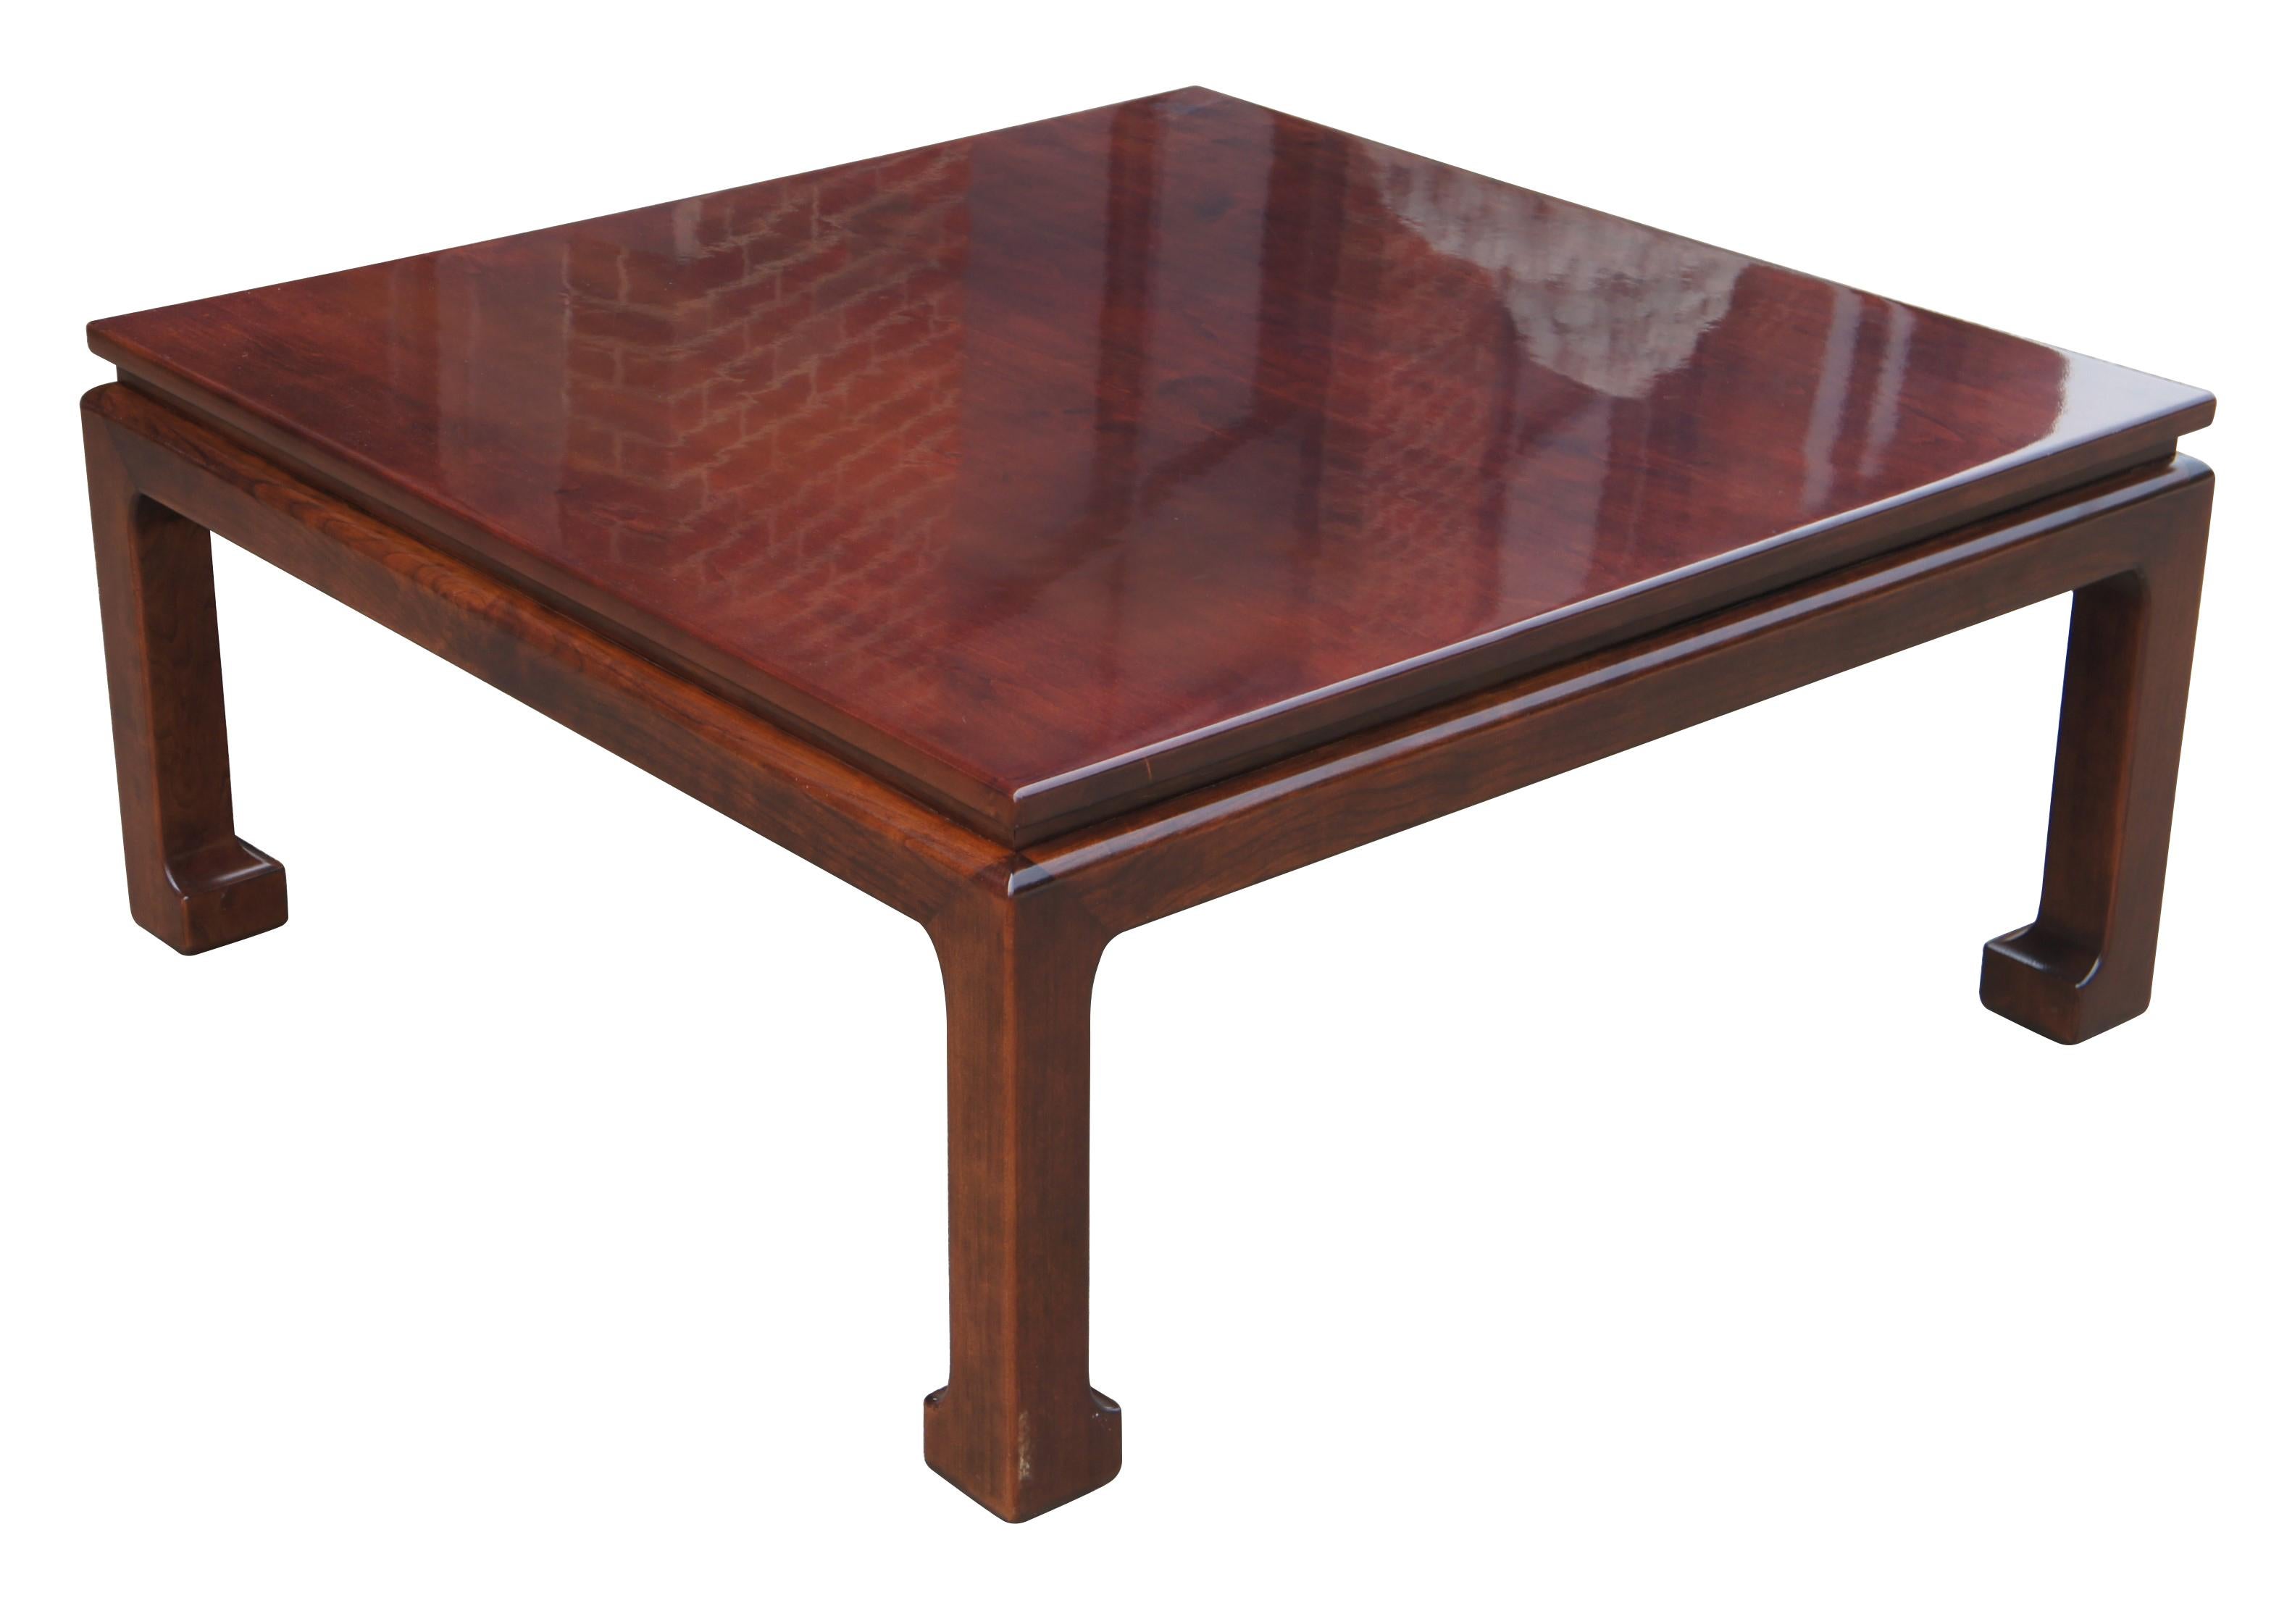 A beautiful Chinoiserie coffee table.  Made from rosewood in classic Ming form with a square top over straight legs with inward flared feet.  Brass plate along underside Marked NW.

Dimensions:
42